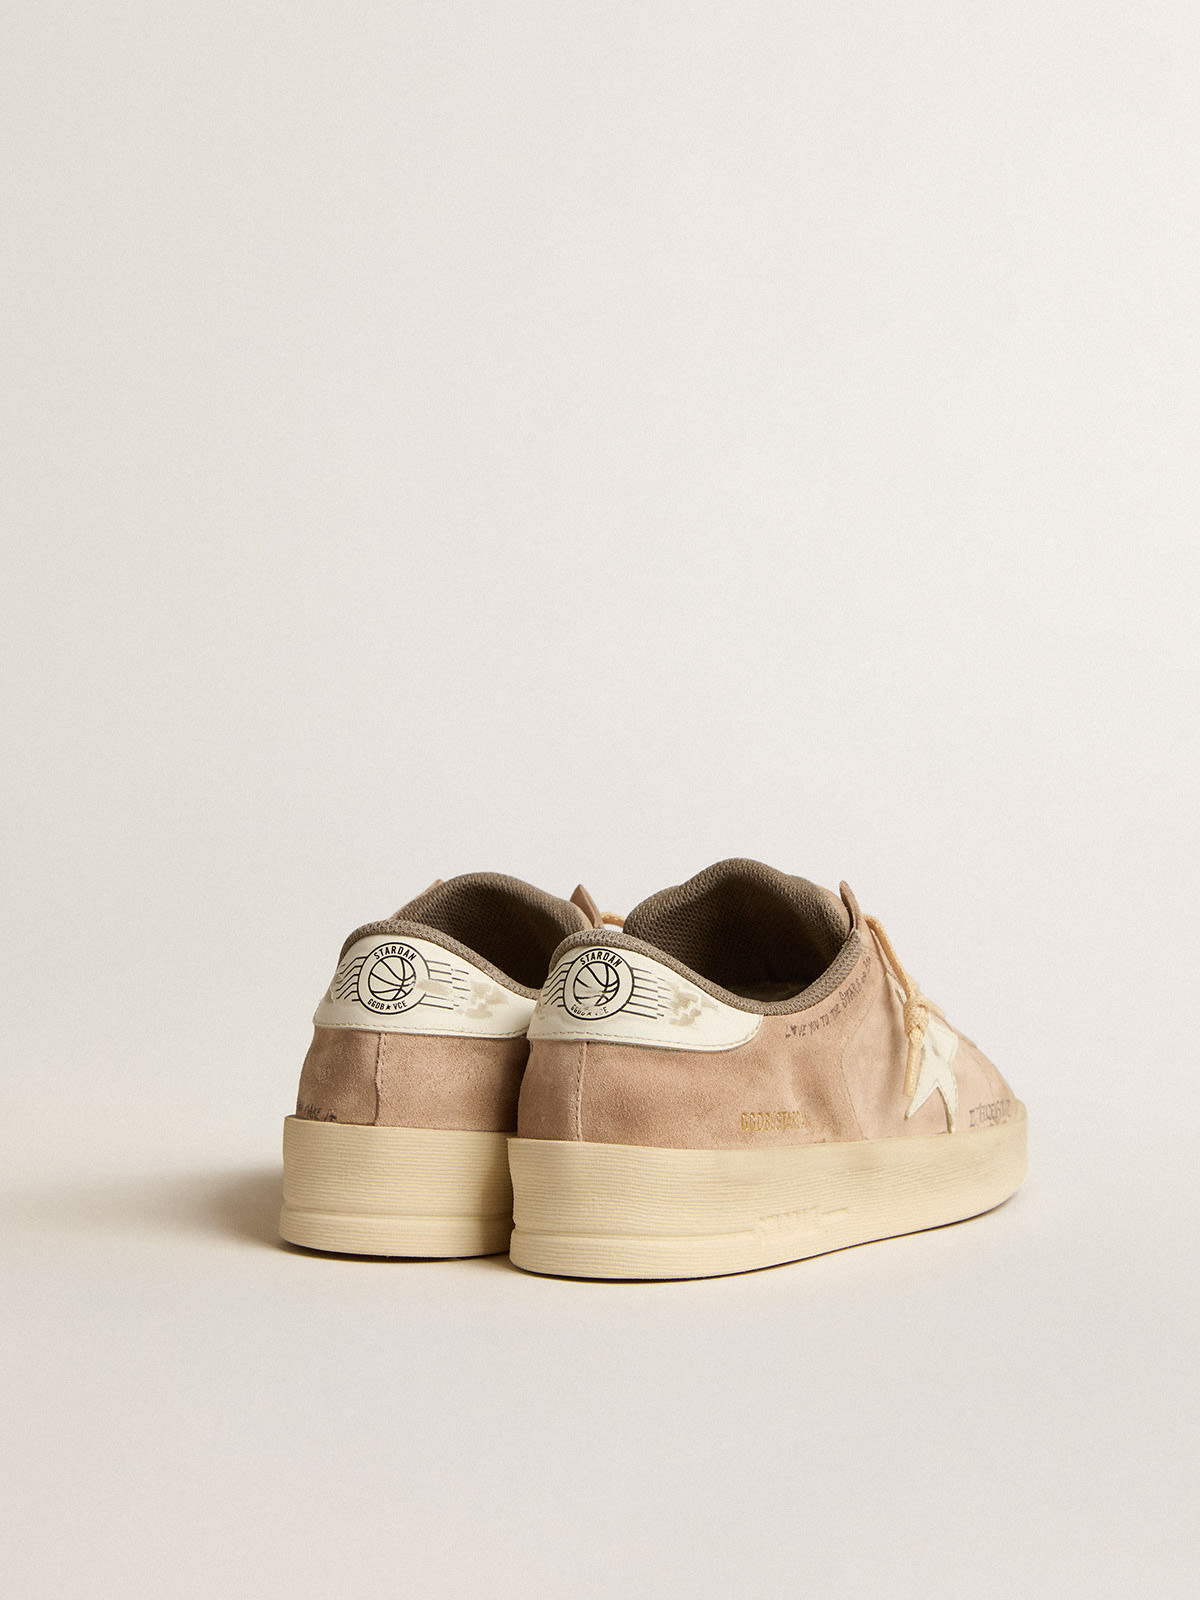 Stardan in old rose suede with white leather star and heel tab | Golden ...